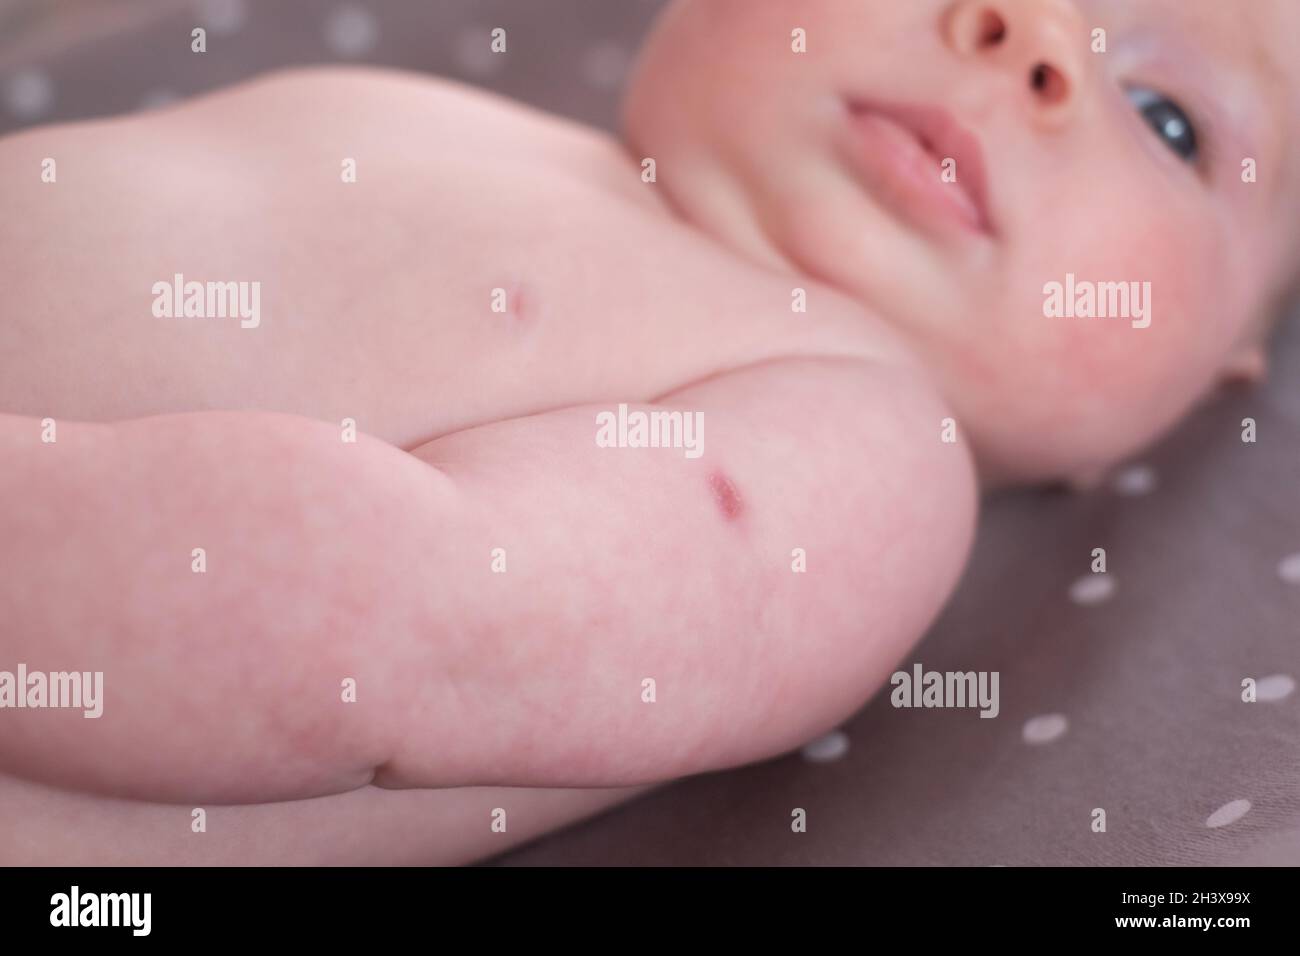 Newborn with traces of BCG vaccination orthe TB vaccine-on his arm. Stock Photo